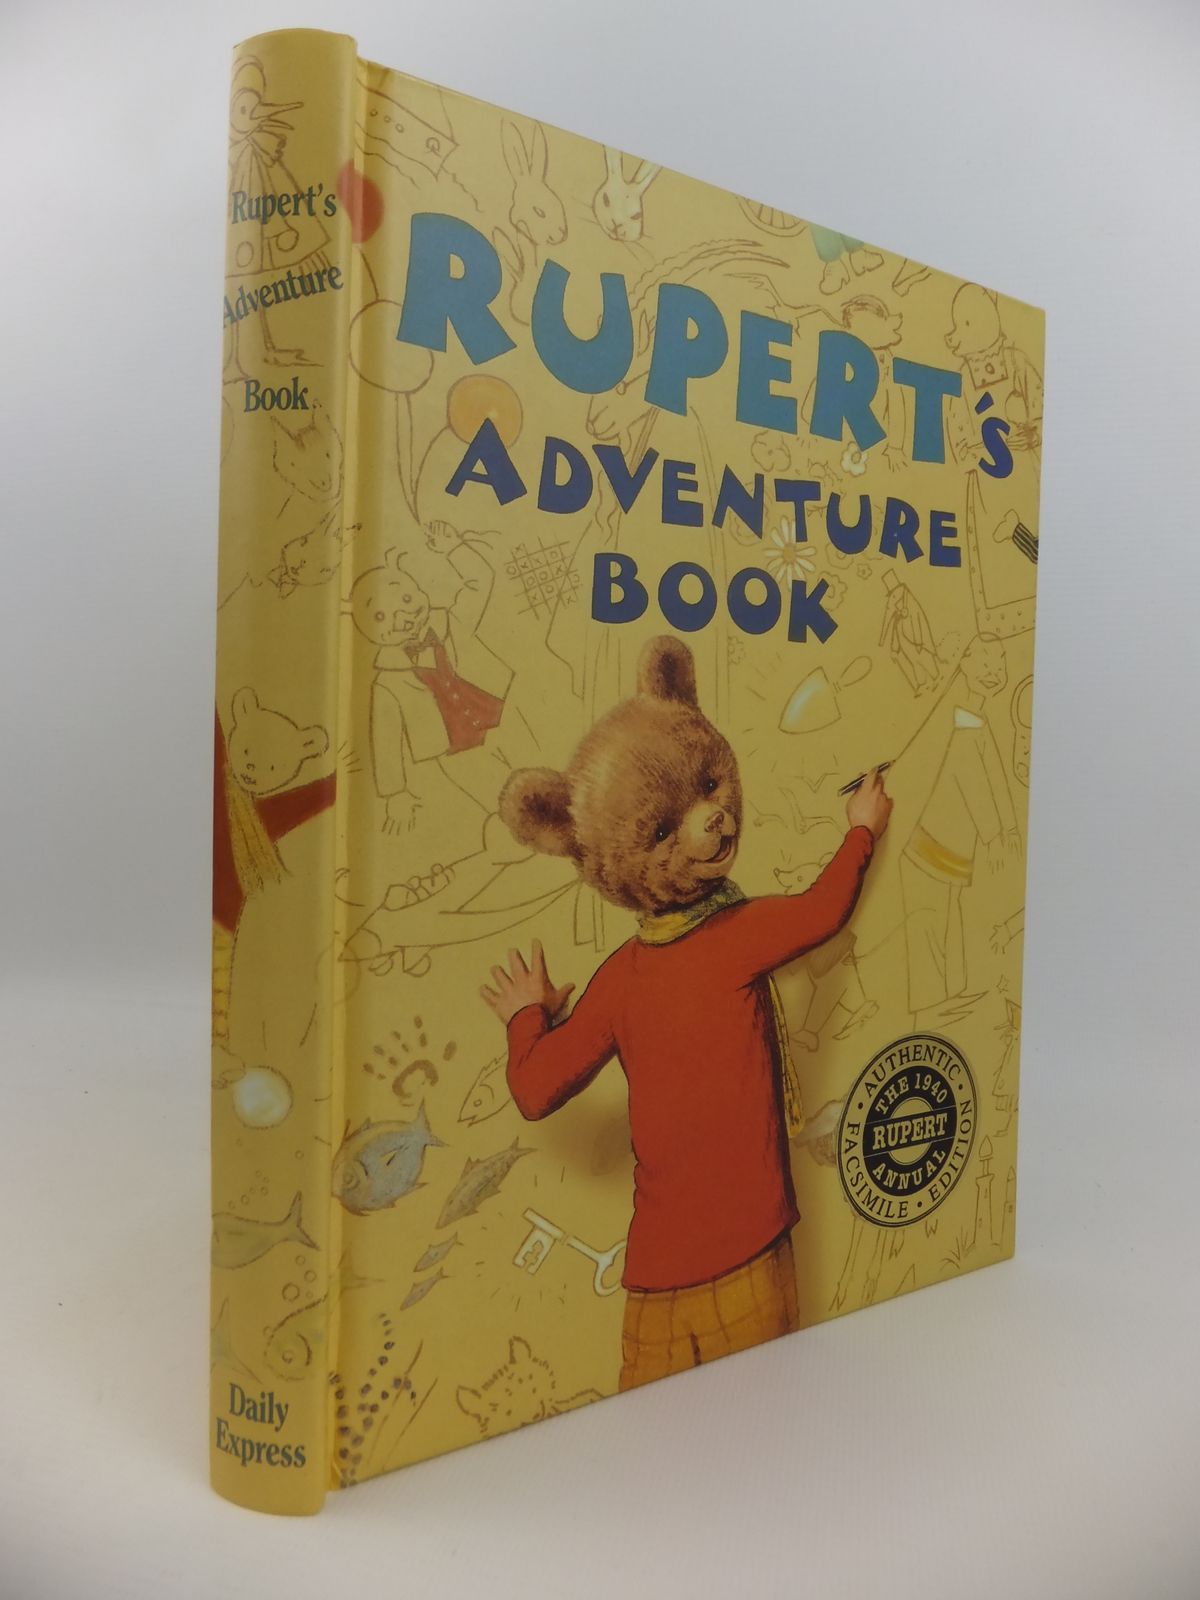 Photo of RUPERT ANNUAL 1940 (FACSIMILE) - RUPERT'S ADVENTURE BOOK written by Bestall, Alfred illustrated by Bestall, Alfred published by Annual Concepts Limited (STOCK CODE: 2122154)  for sale by Stella & Rose's Books